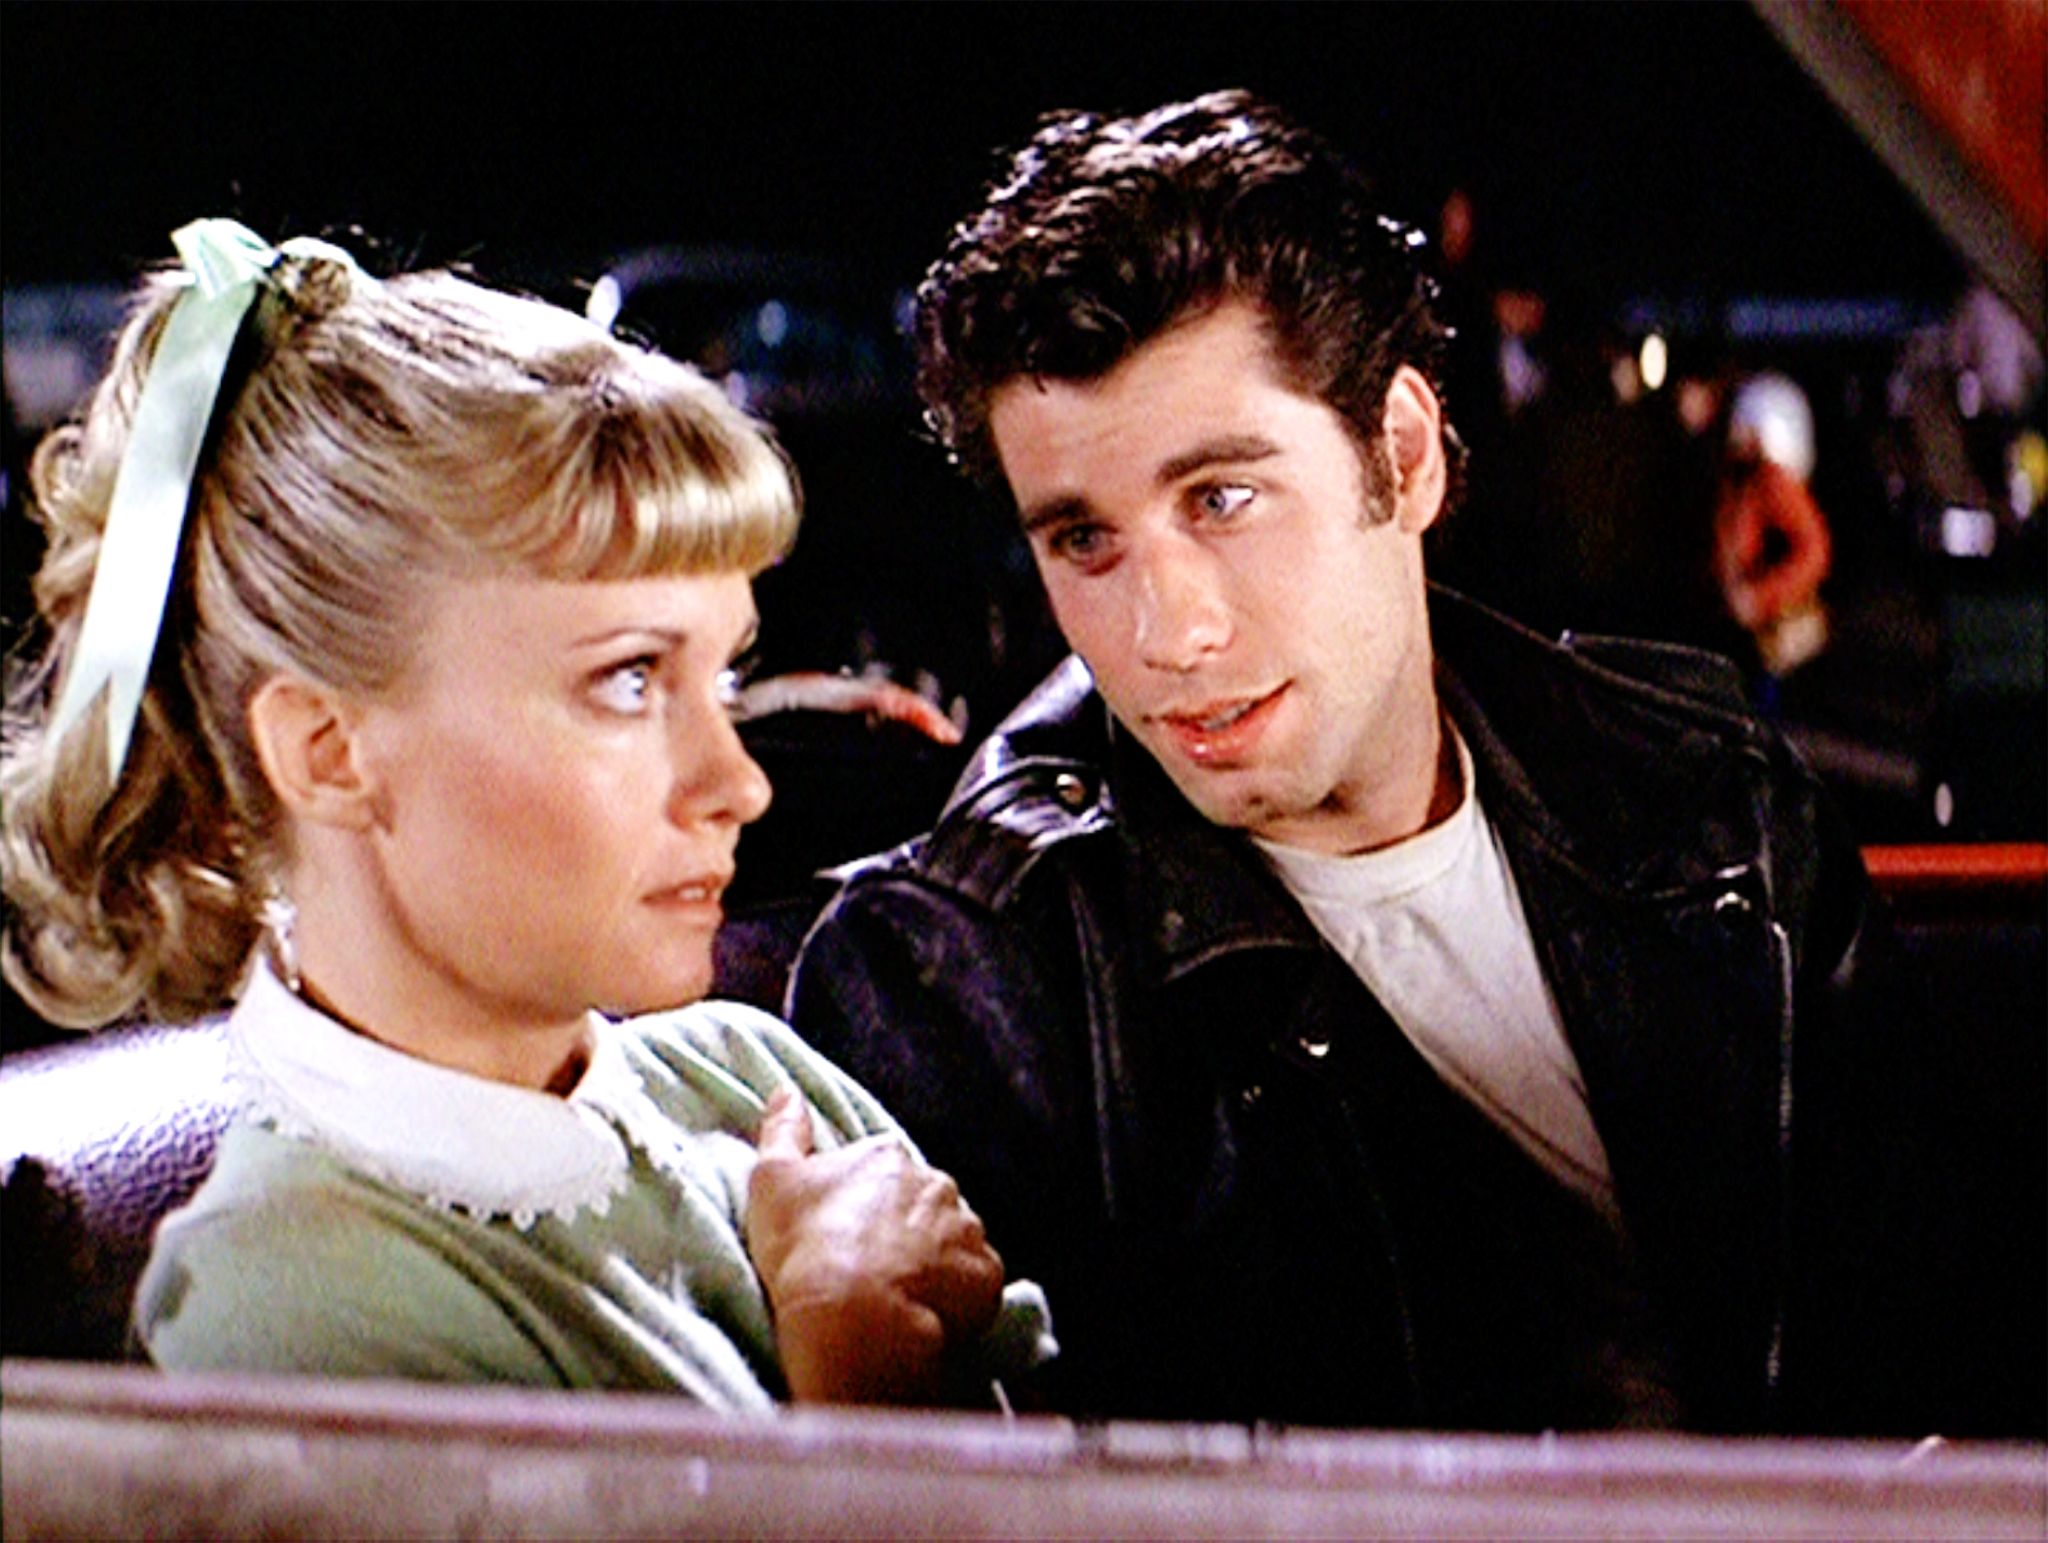 los angeles   june 16 the movie grease, directed by randal kleiser seen here at the drive in from left olivia newton john as sandy and john travolta as danny zuko initial theatrical release of the film, june 16, 1978 screen capture paramount pictures photo by cbs via getty images